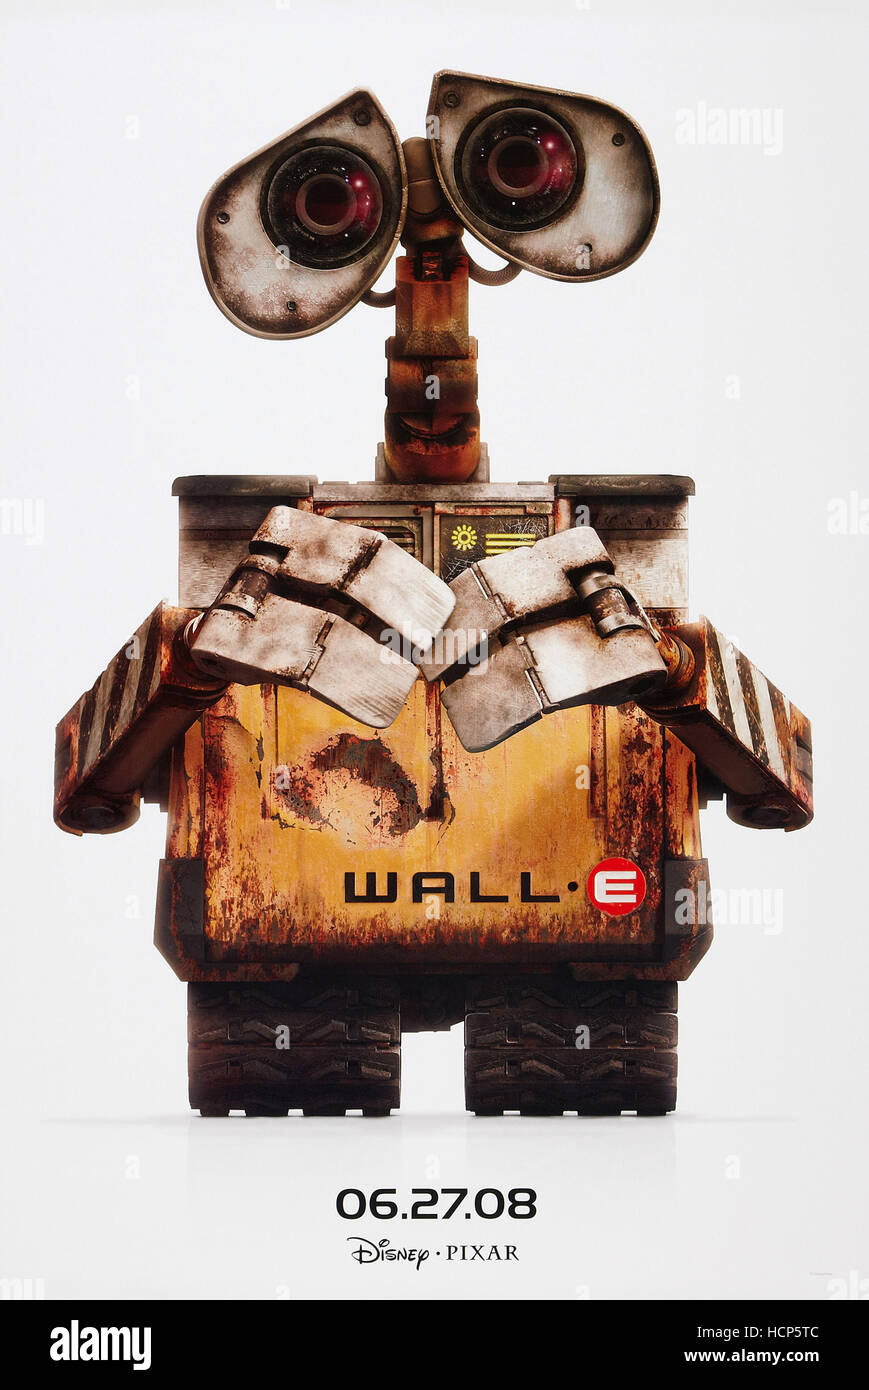 WALL-E, US advance poster art, 2008. ©Walt Disney Studios Motion Pictures/courtesy Everett Collection Stock Photo